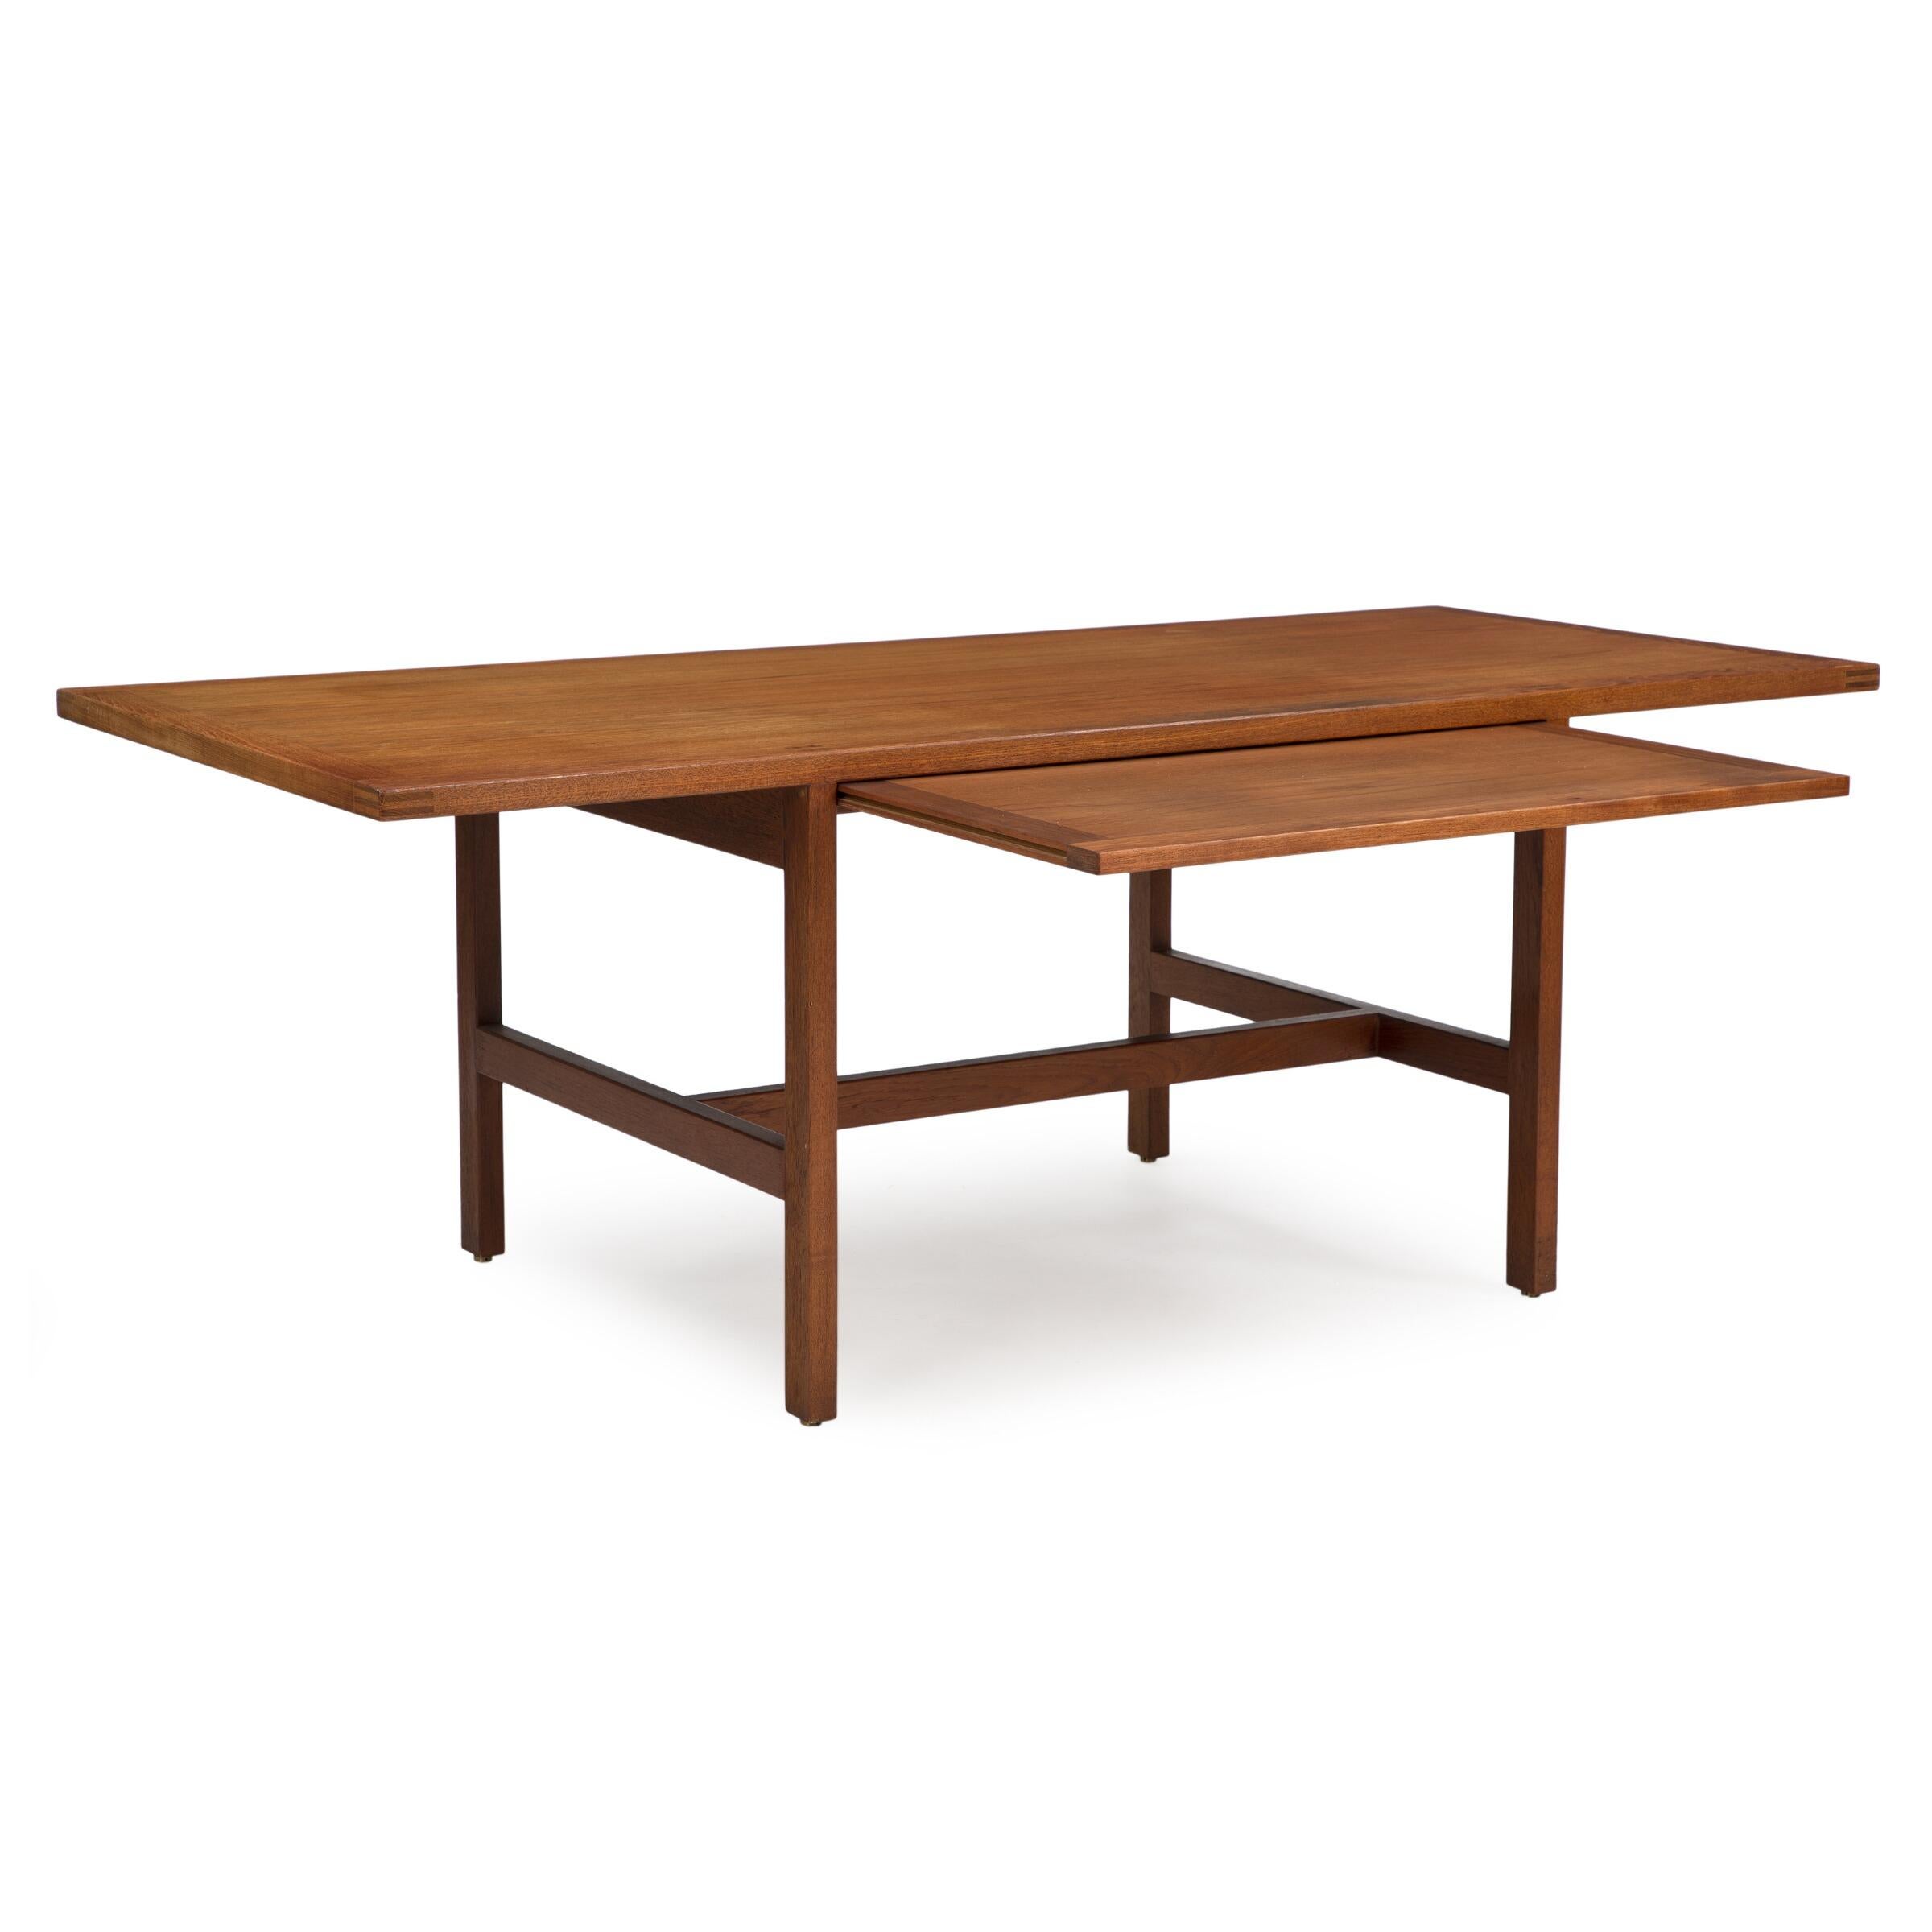 Desk of teak, including module with three drawers and extension leaf.
Dimensions: 75